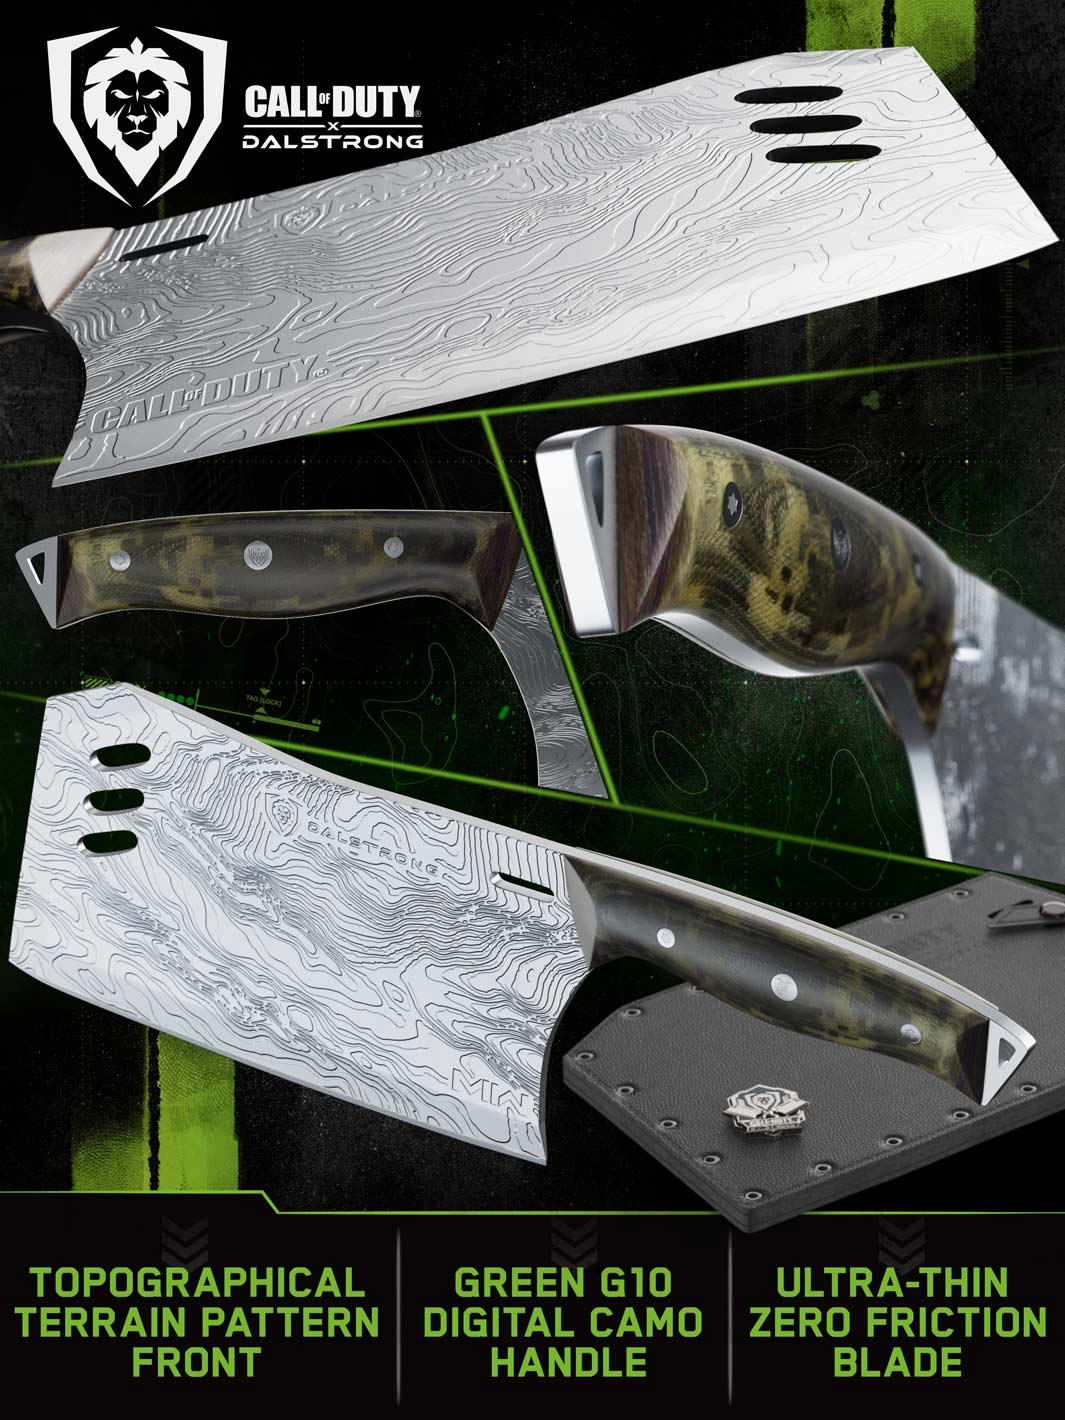 Dalstrong call of duty series obliterator cleaver knife specification.